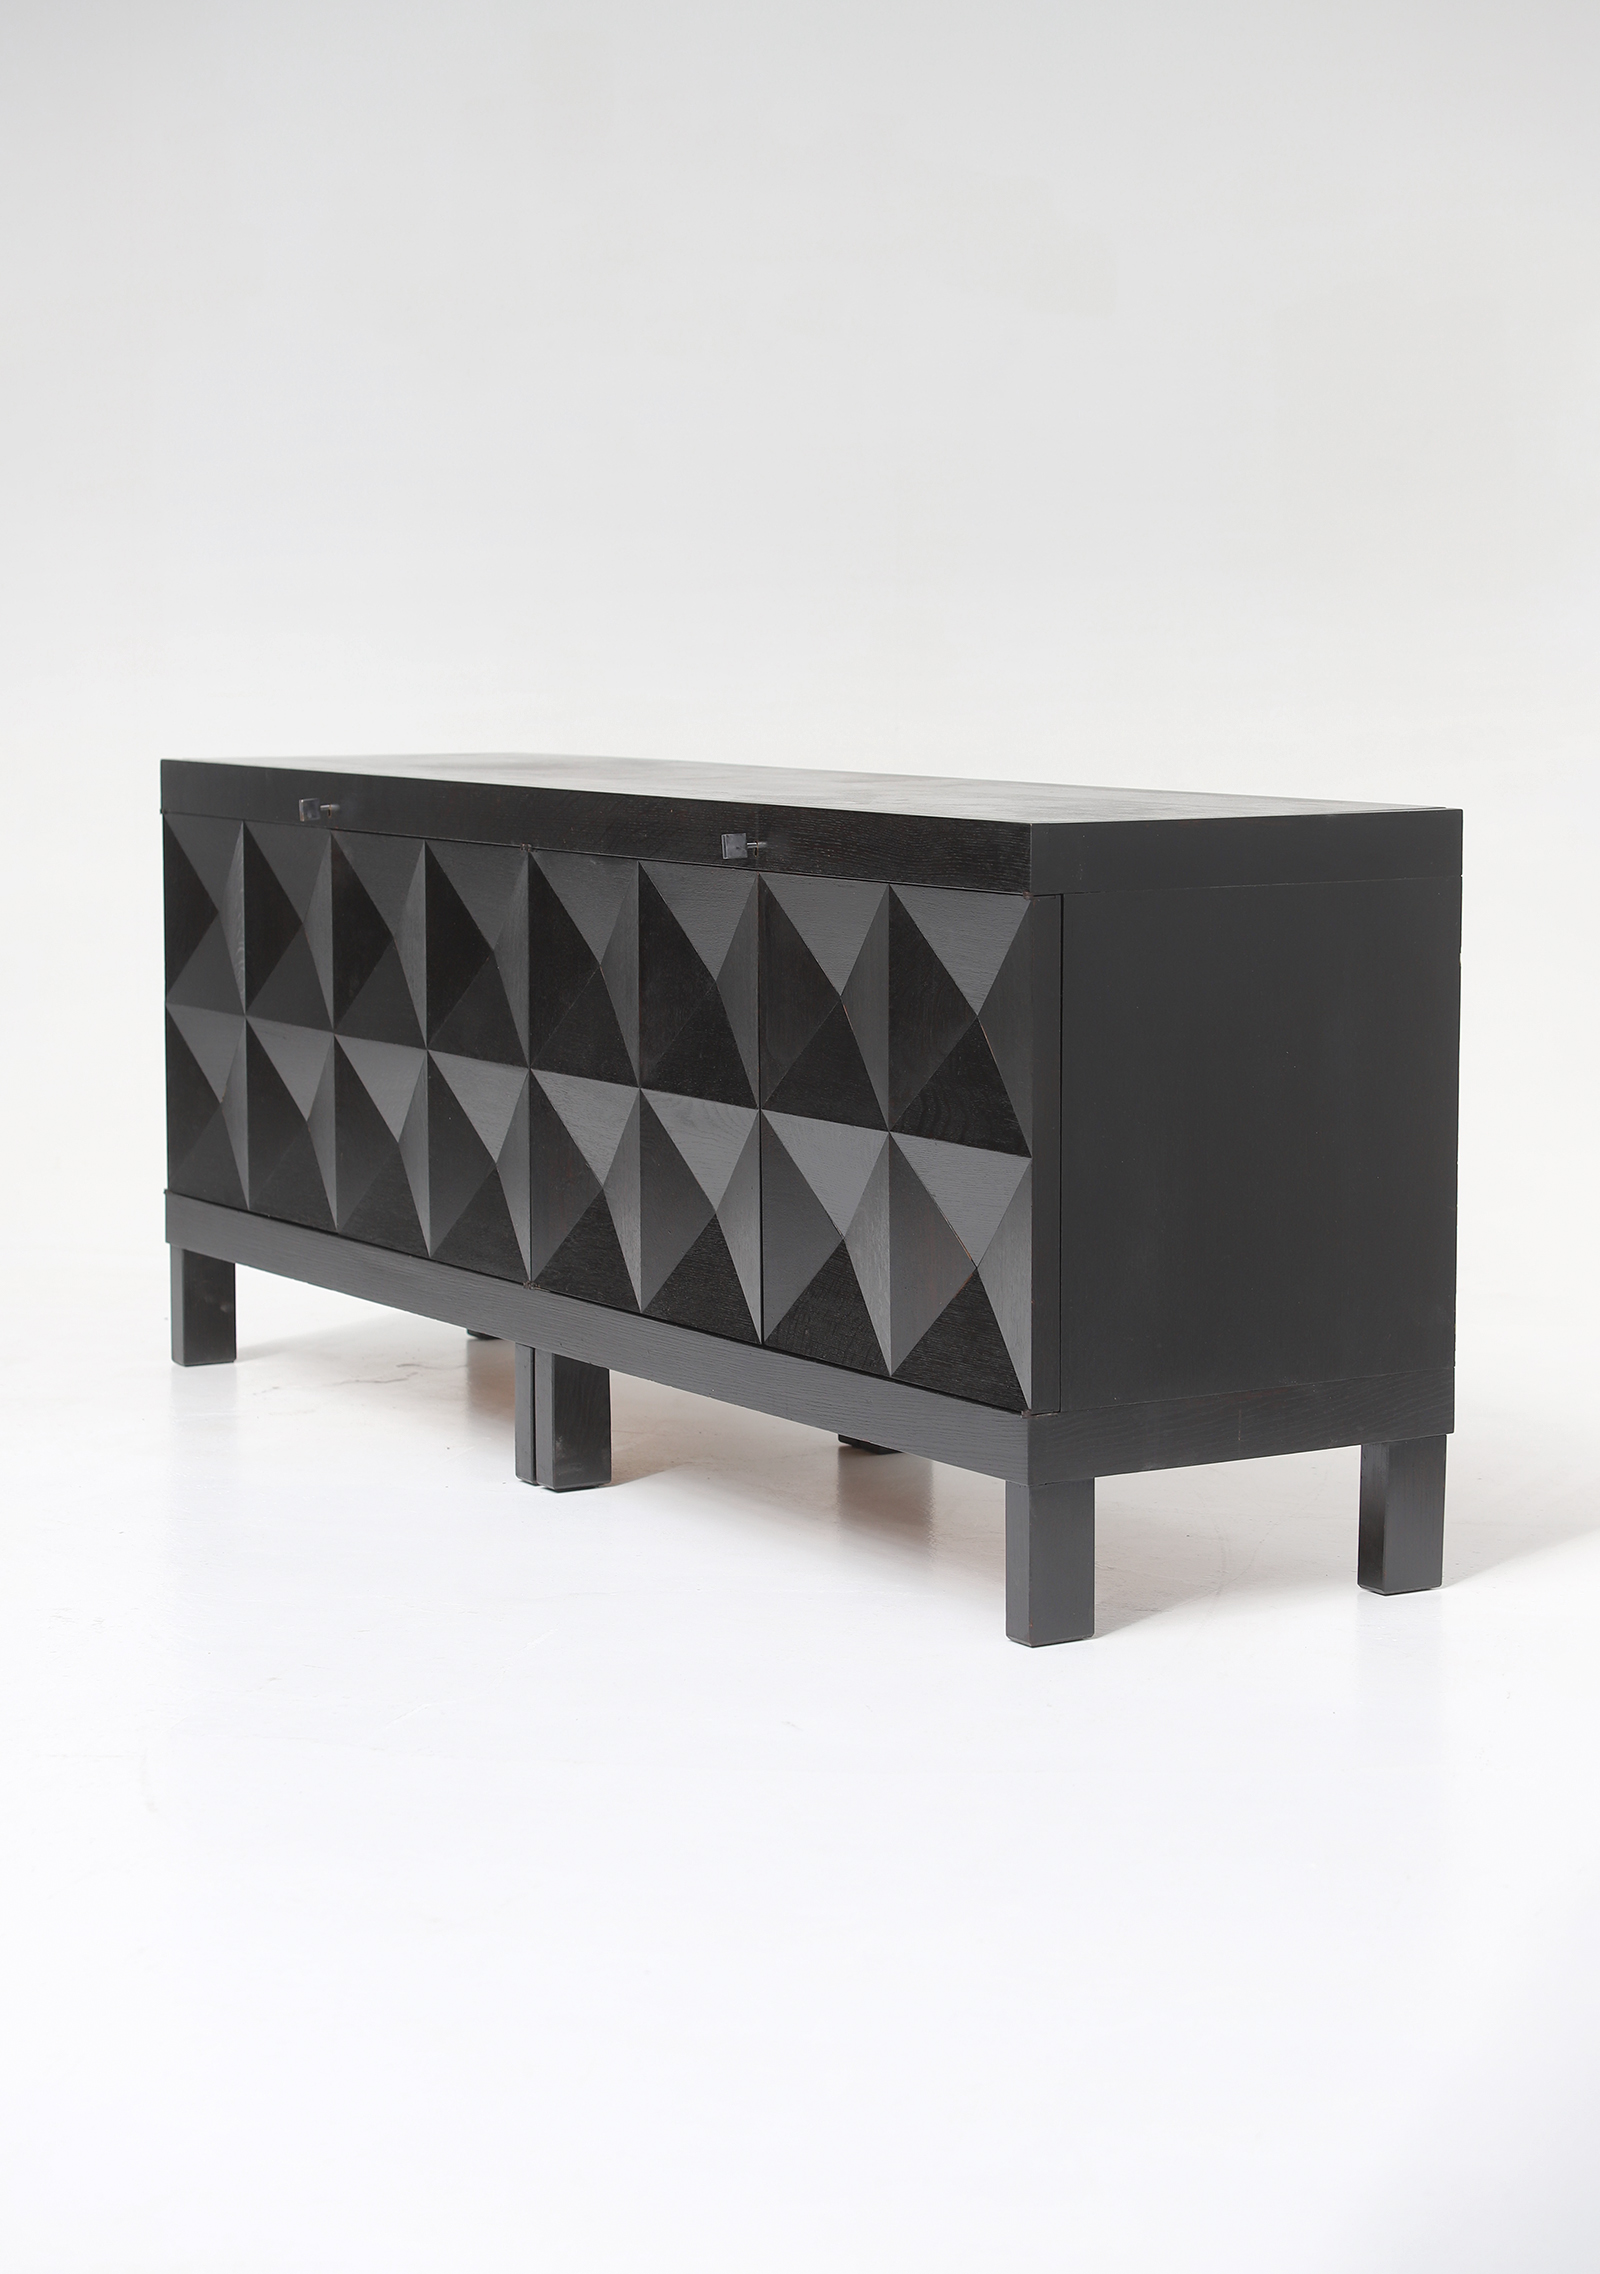 quality crafted sideboard with op-art doors designed by J. Batenburg for MI, Belgium 1969image 8